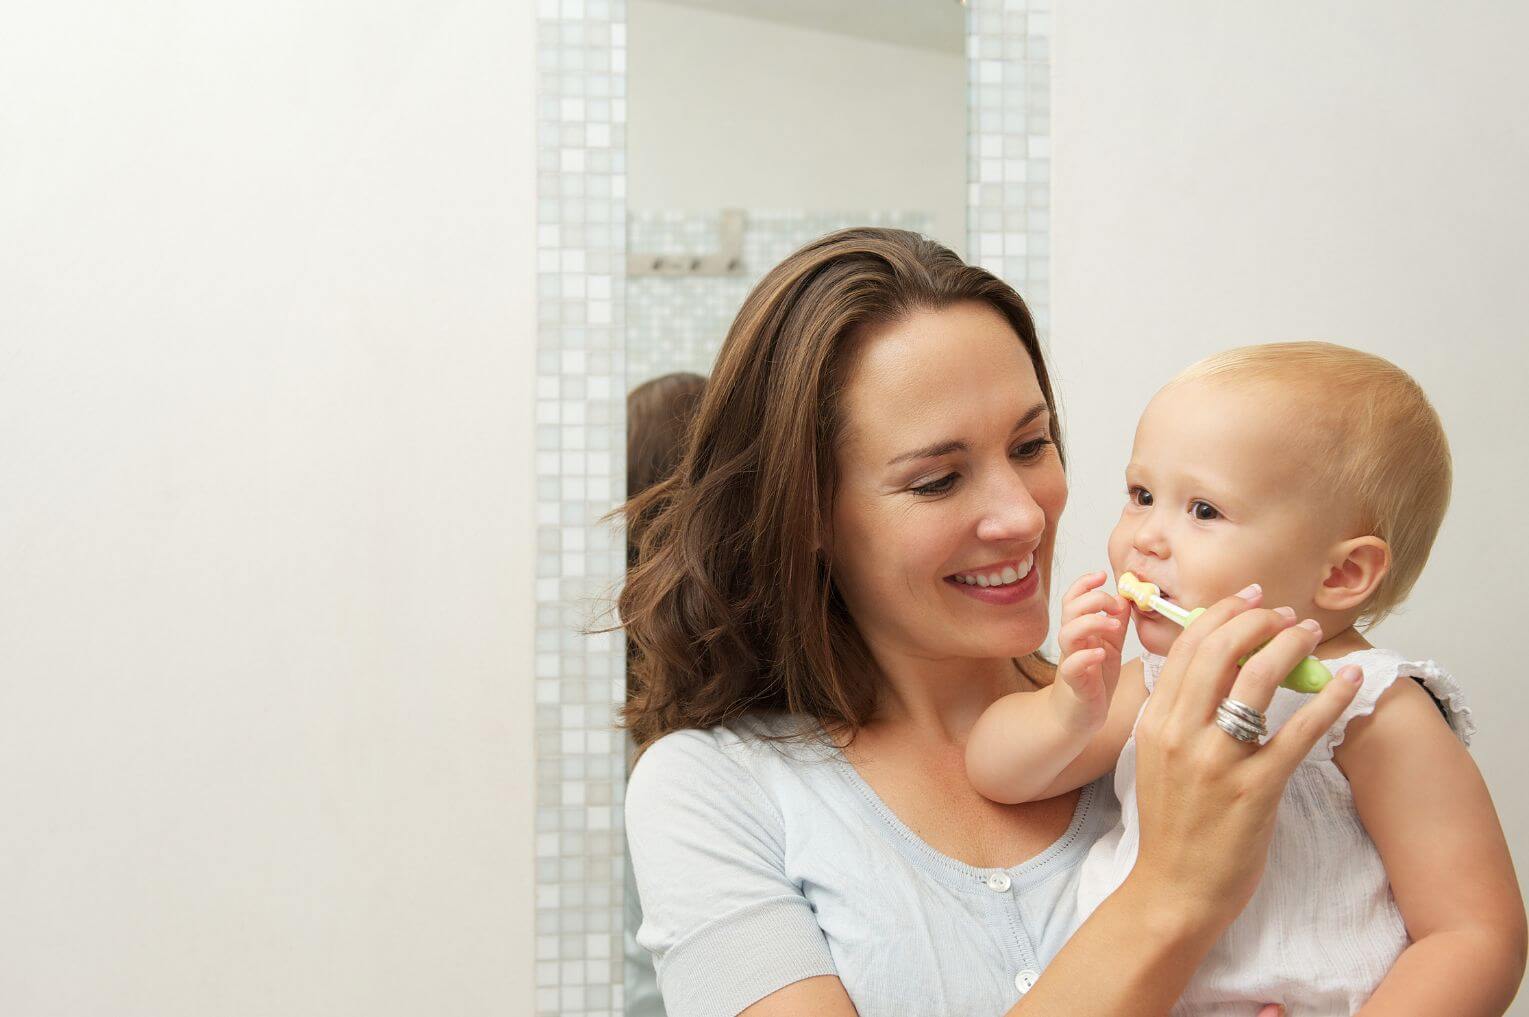 mother brushing her baby's teeth